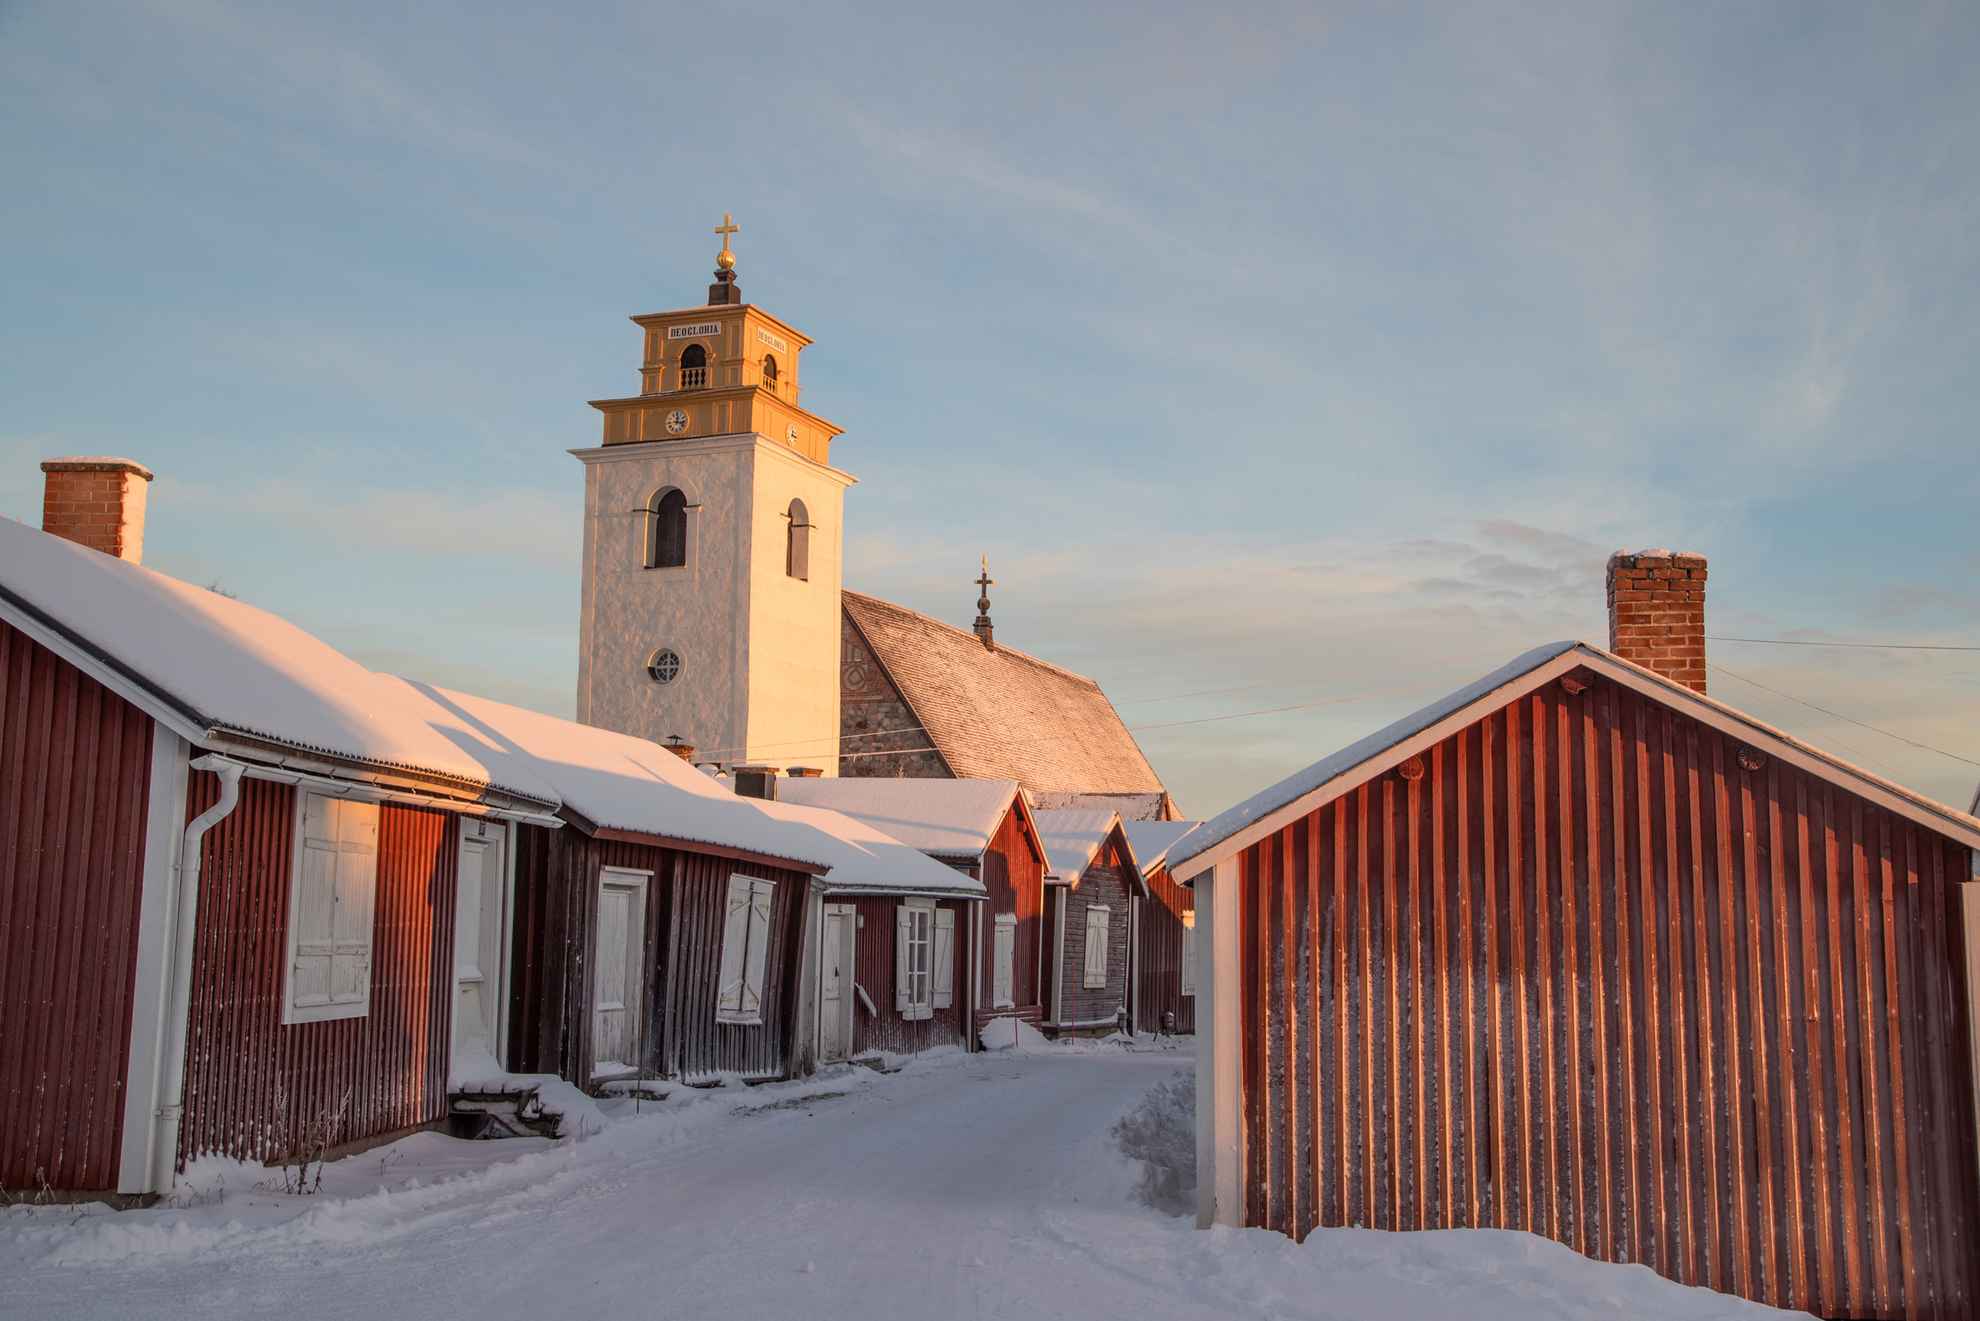 Red cottages and the white church tower in Gammelstad church town during winter.